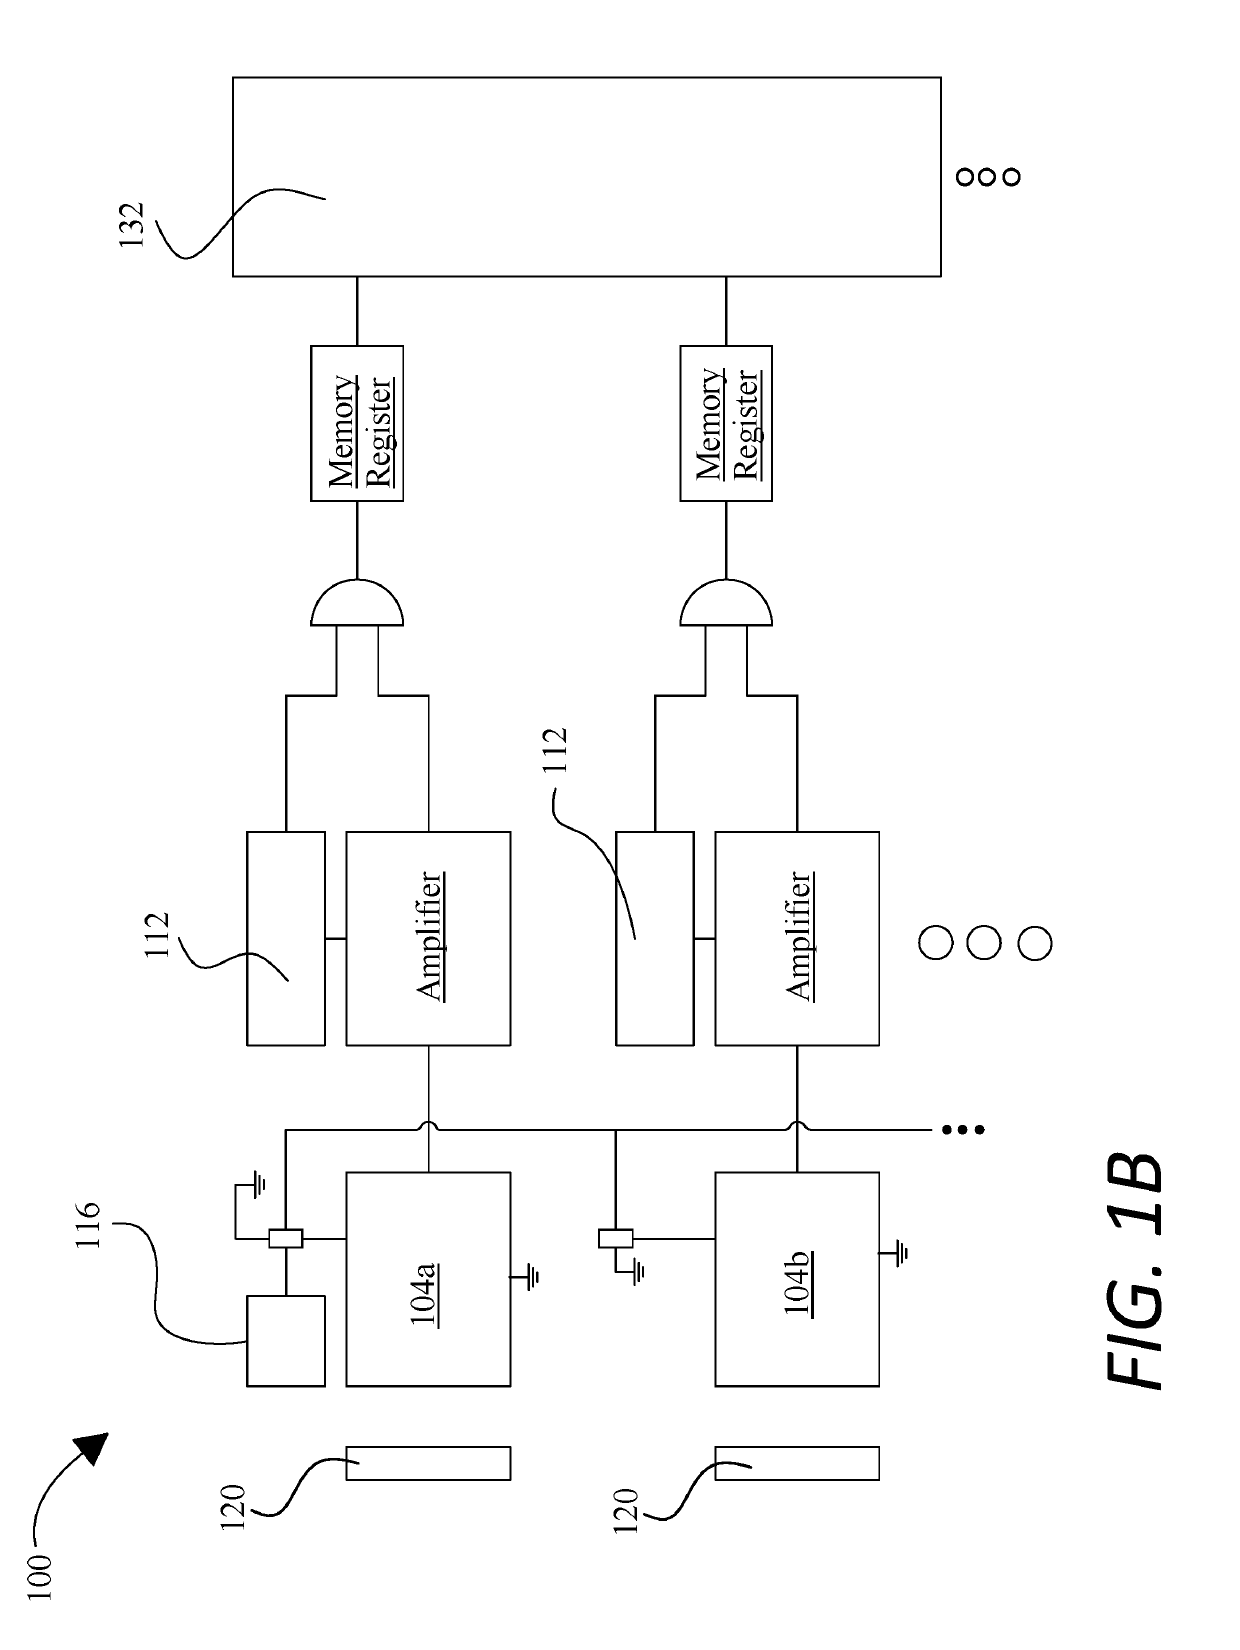 Interleaved photon detection array for optically measuring a physical sample